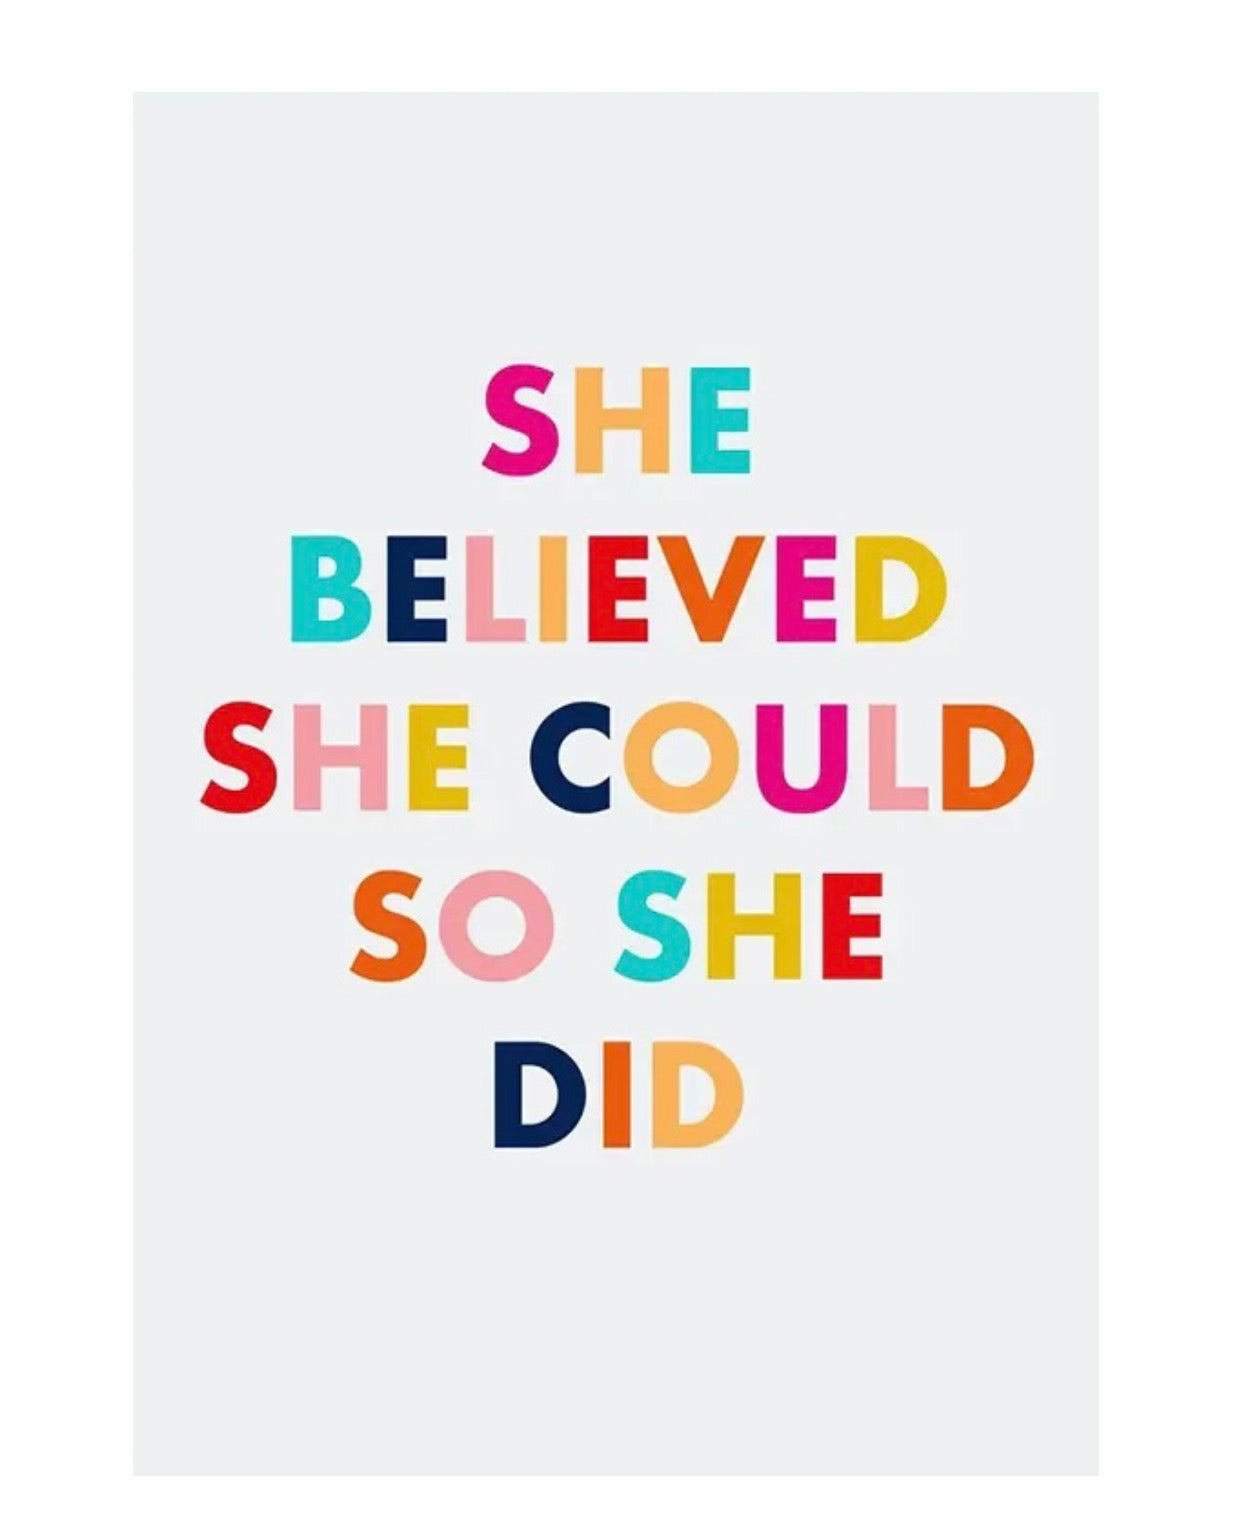 "she believed she could so she did" poster